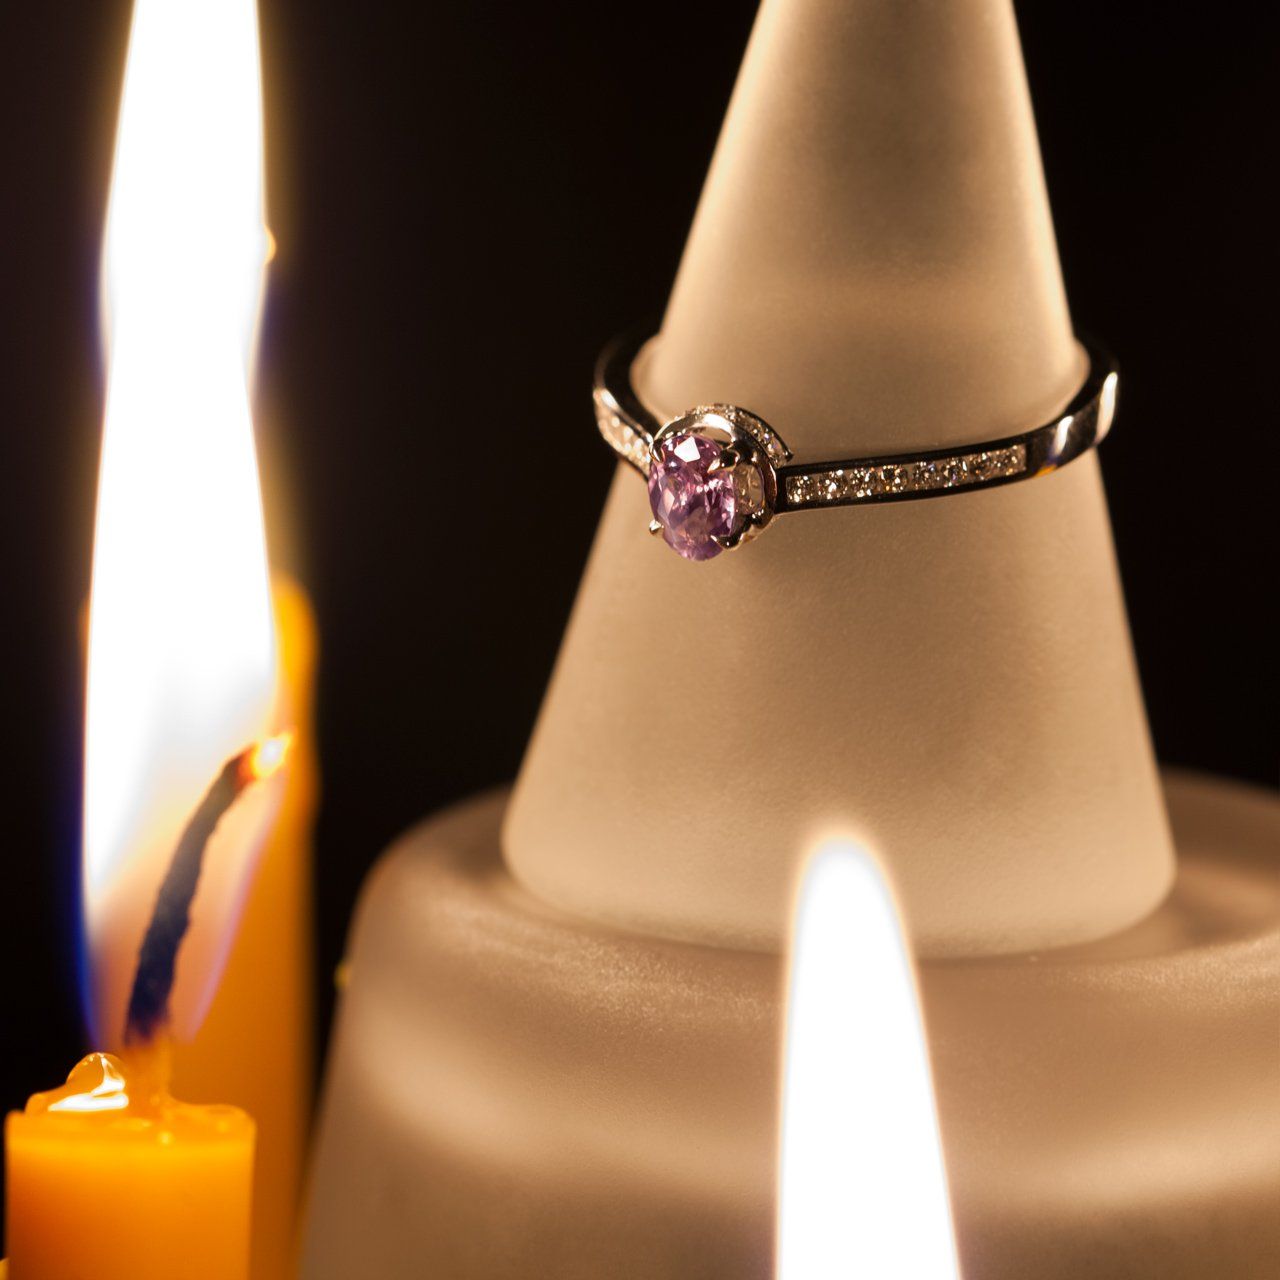 0.55ct alexandrite ring in 18k white gold resting atop a candle for display